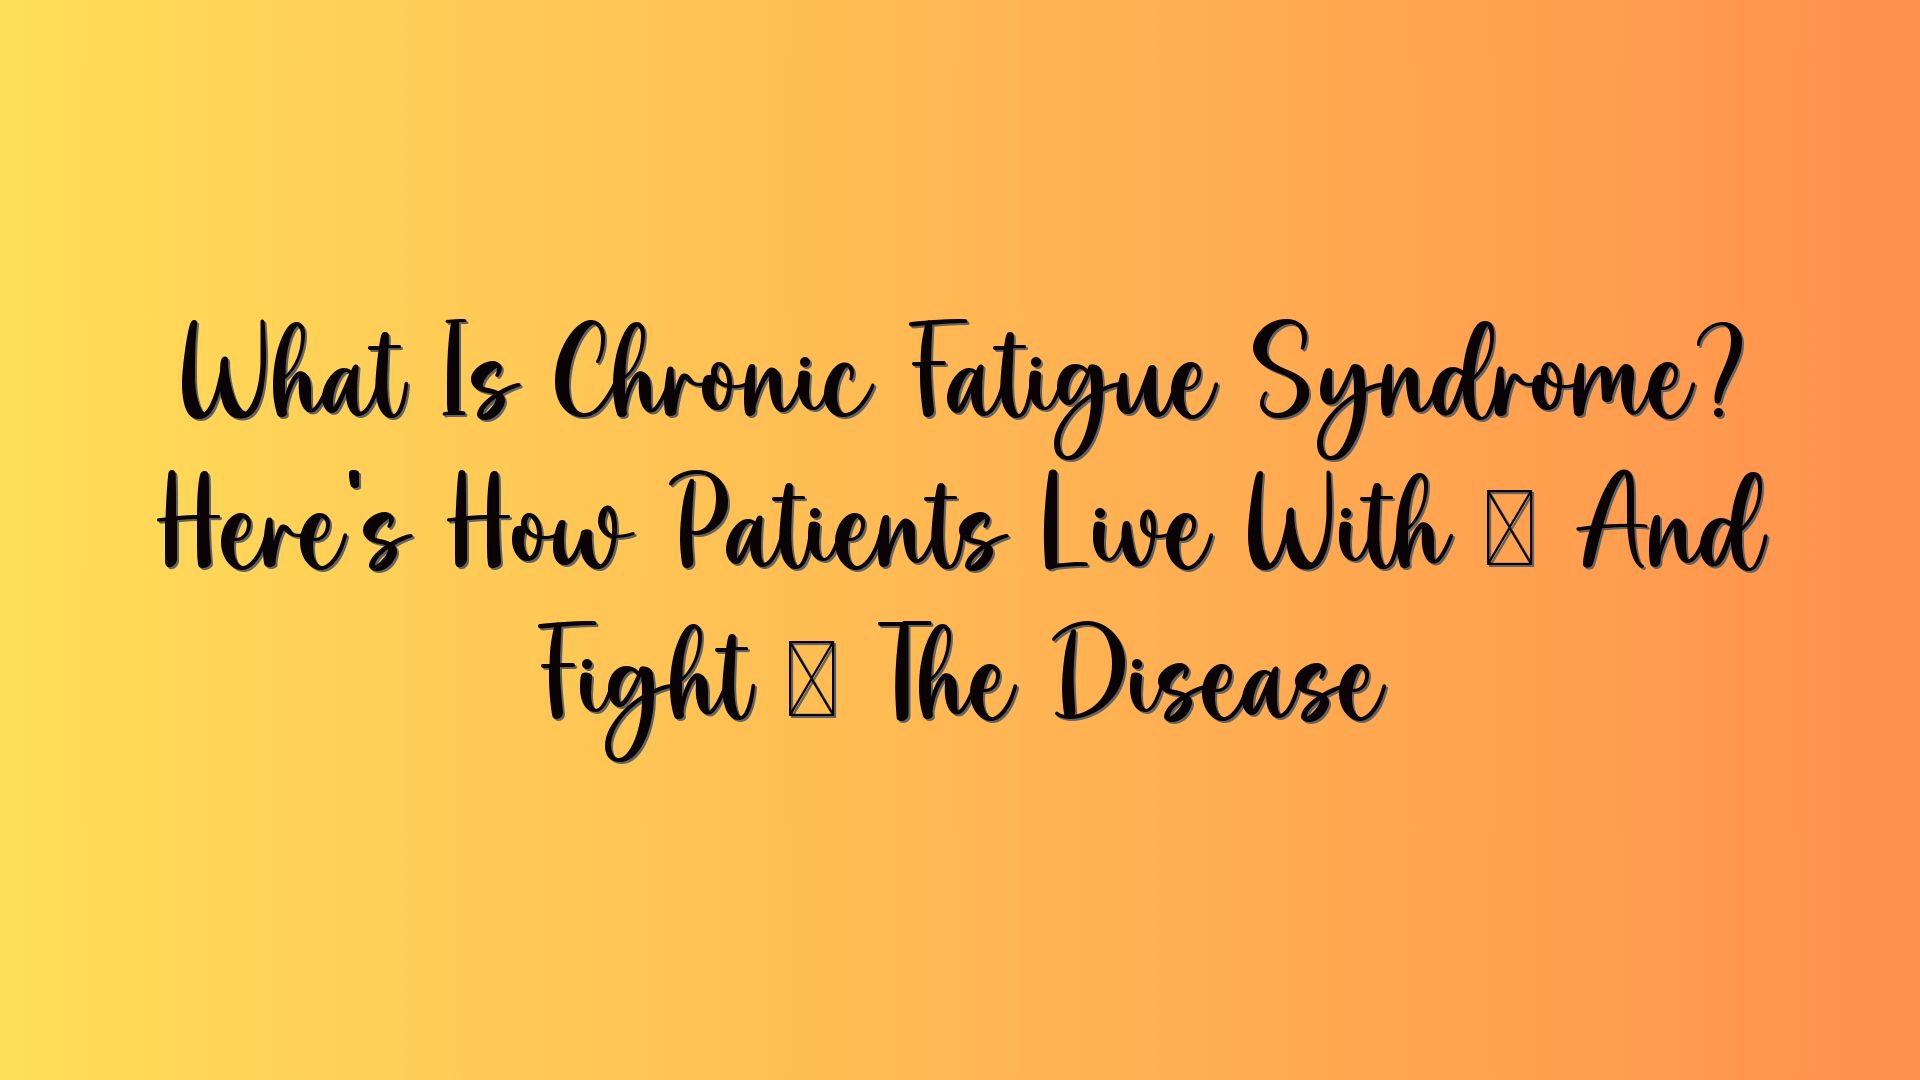 What Is Chronic Fatigue Syndrome? Here’s How Patients Live With — And Fight — The Disease